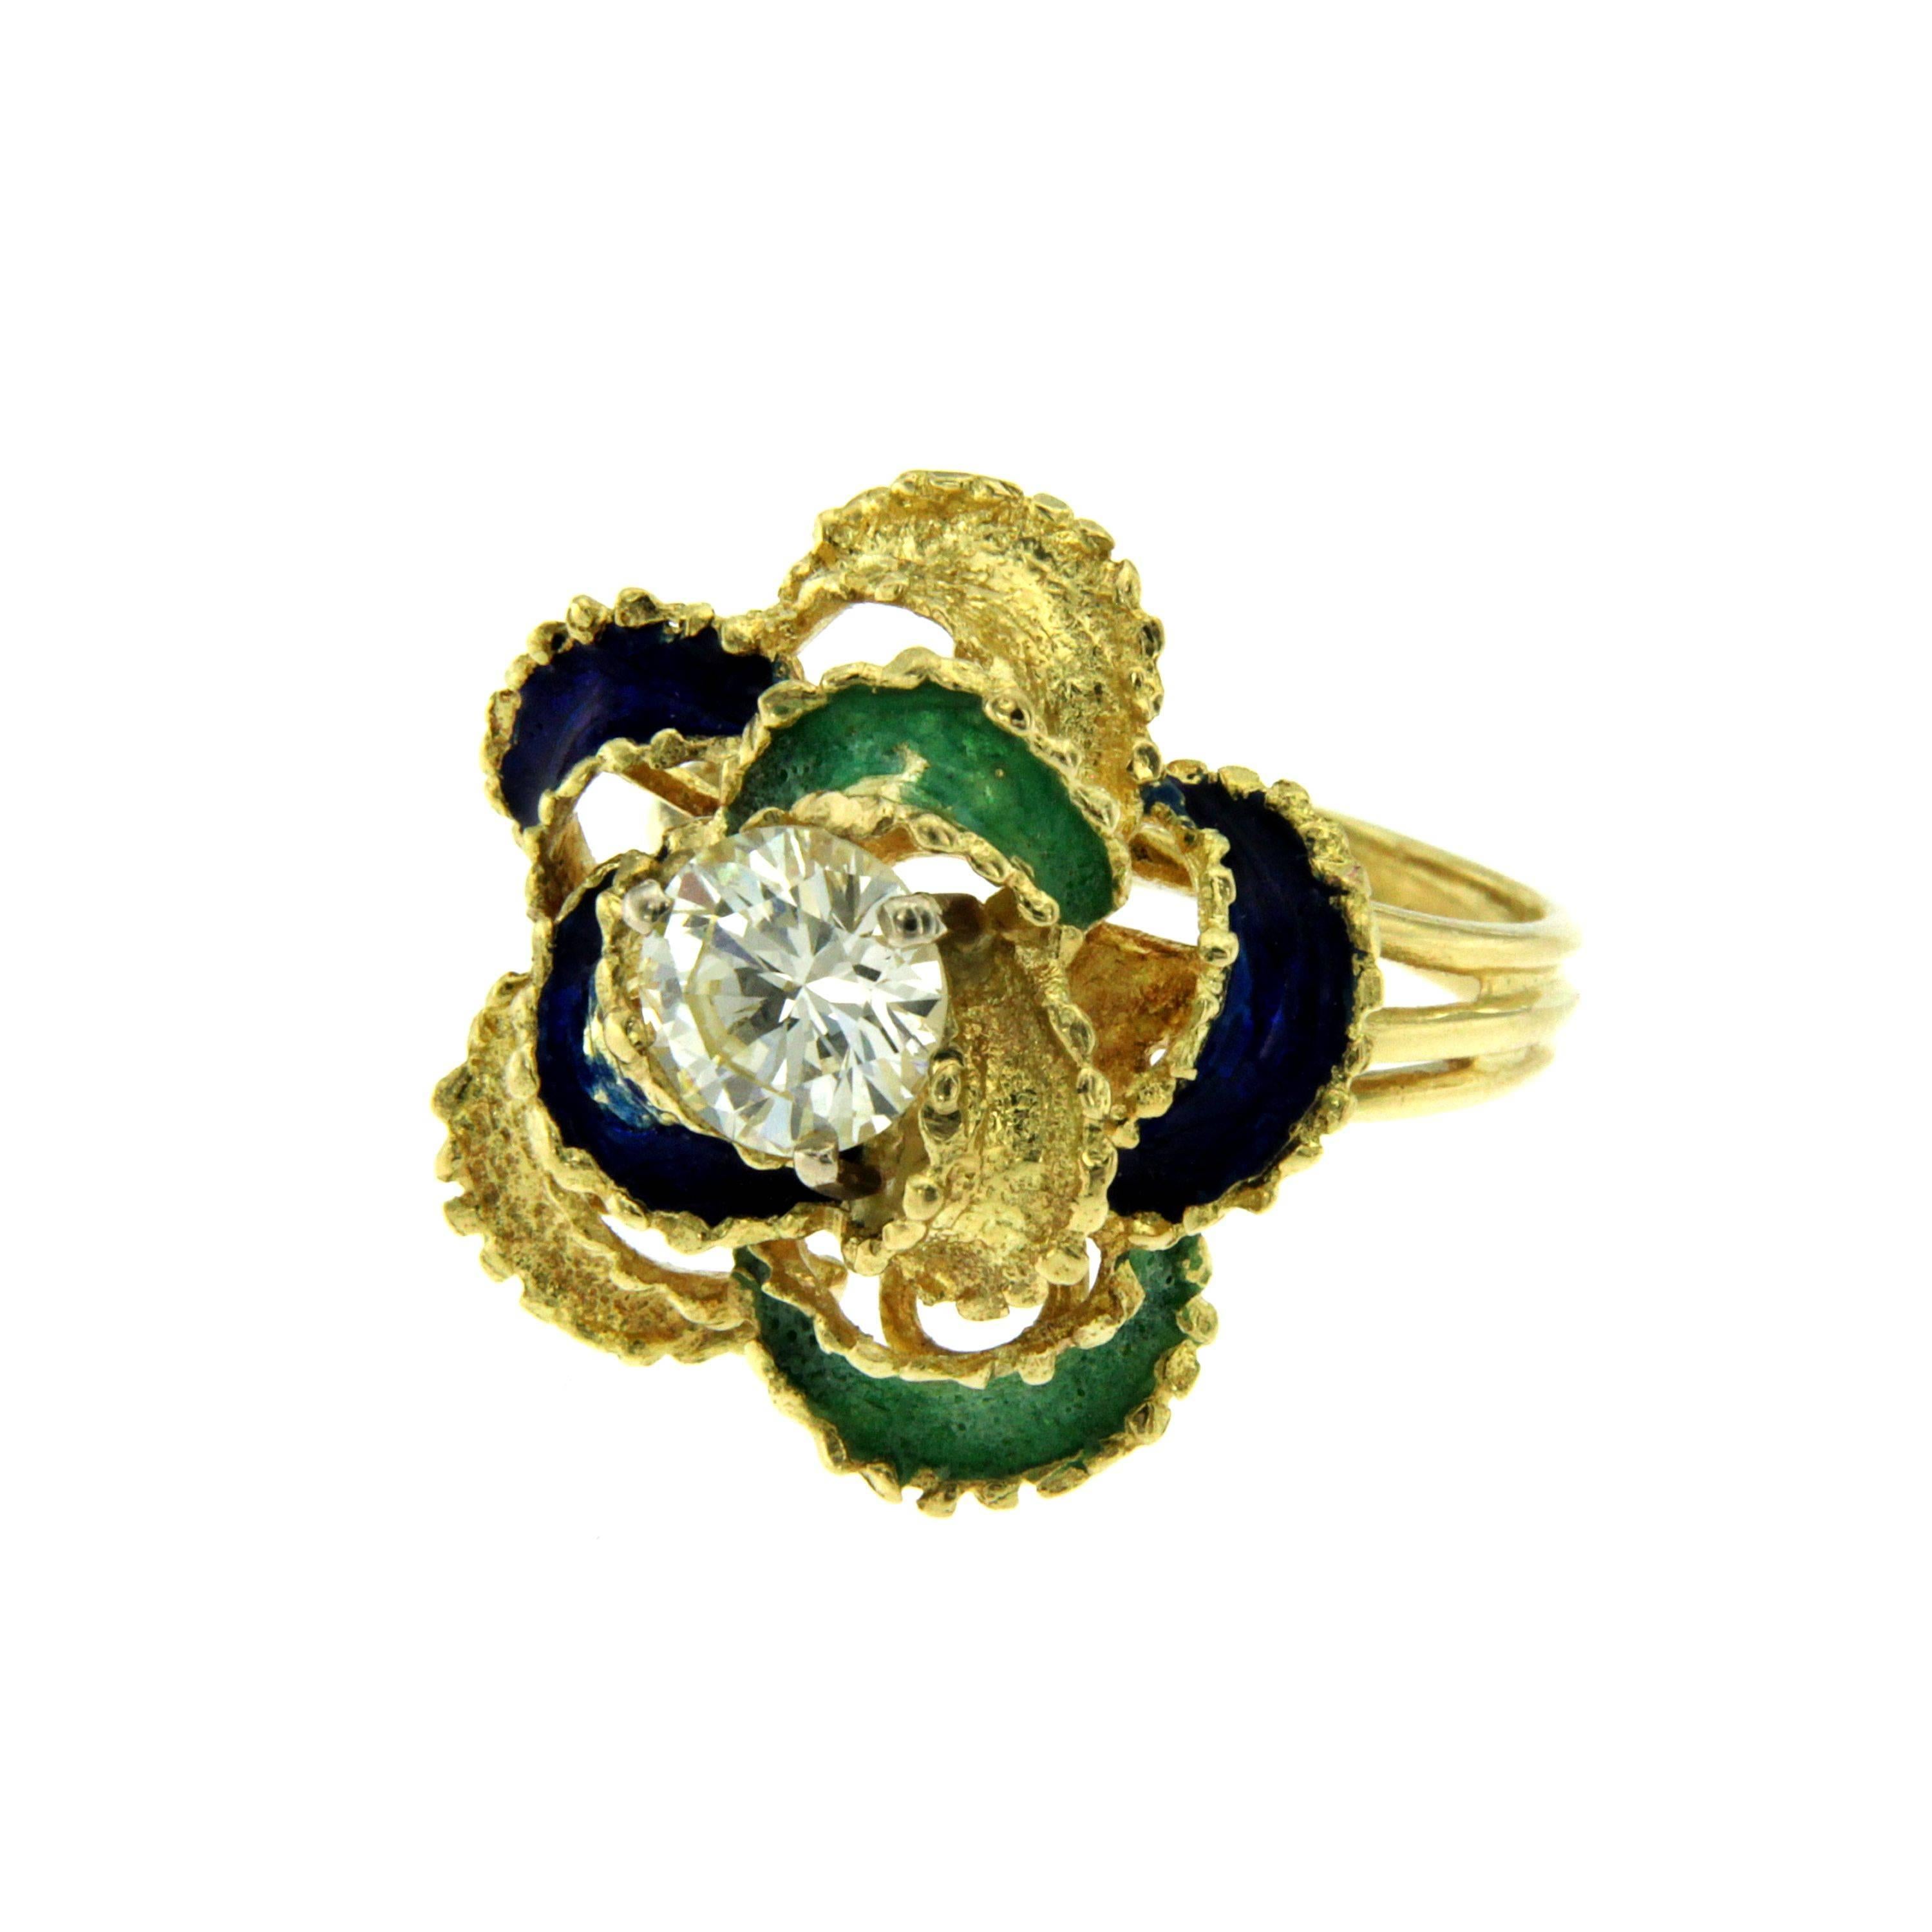 Flower ring hand-made in 18k yellow gold. 
The center of the flower is set with a round brilliant cut diamond weighing 1.30 carat H-I color Vs clarity. Gold leaves have been enamelled in blue and green. Circa 1950

CONDITION: Pre-owned - Excellent